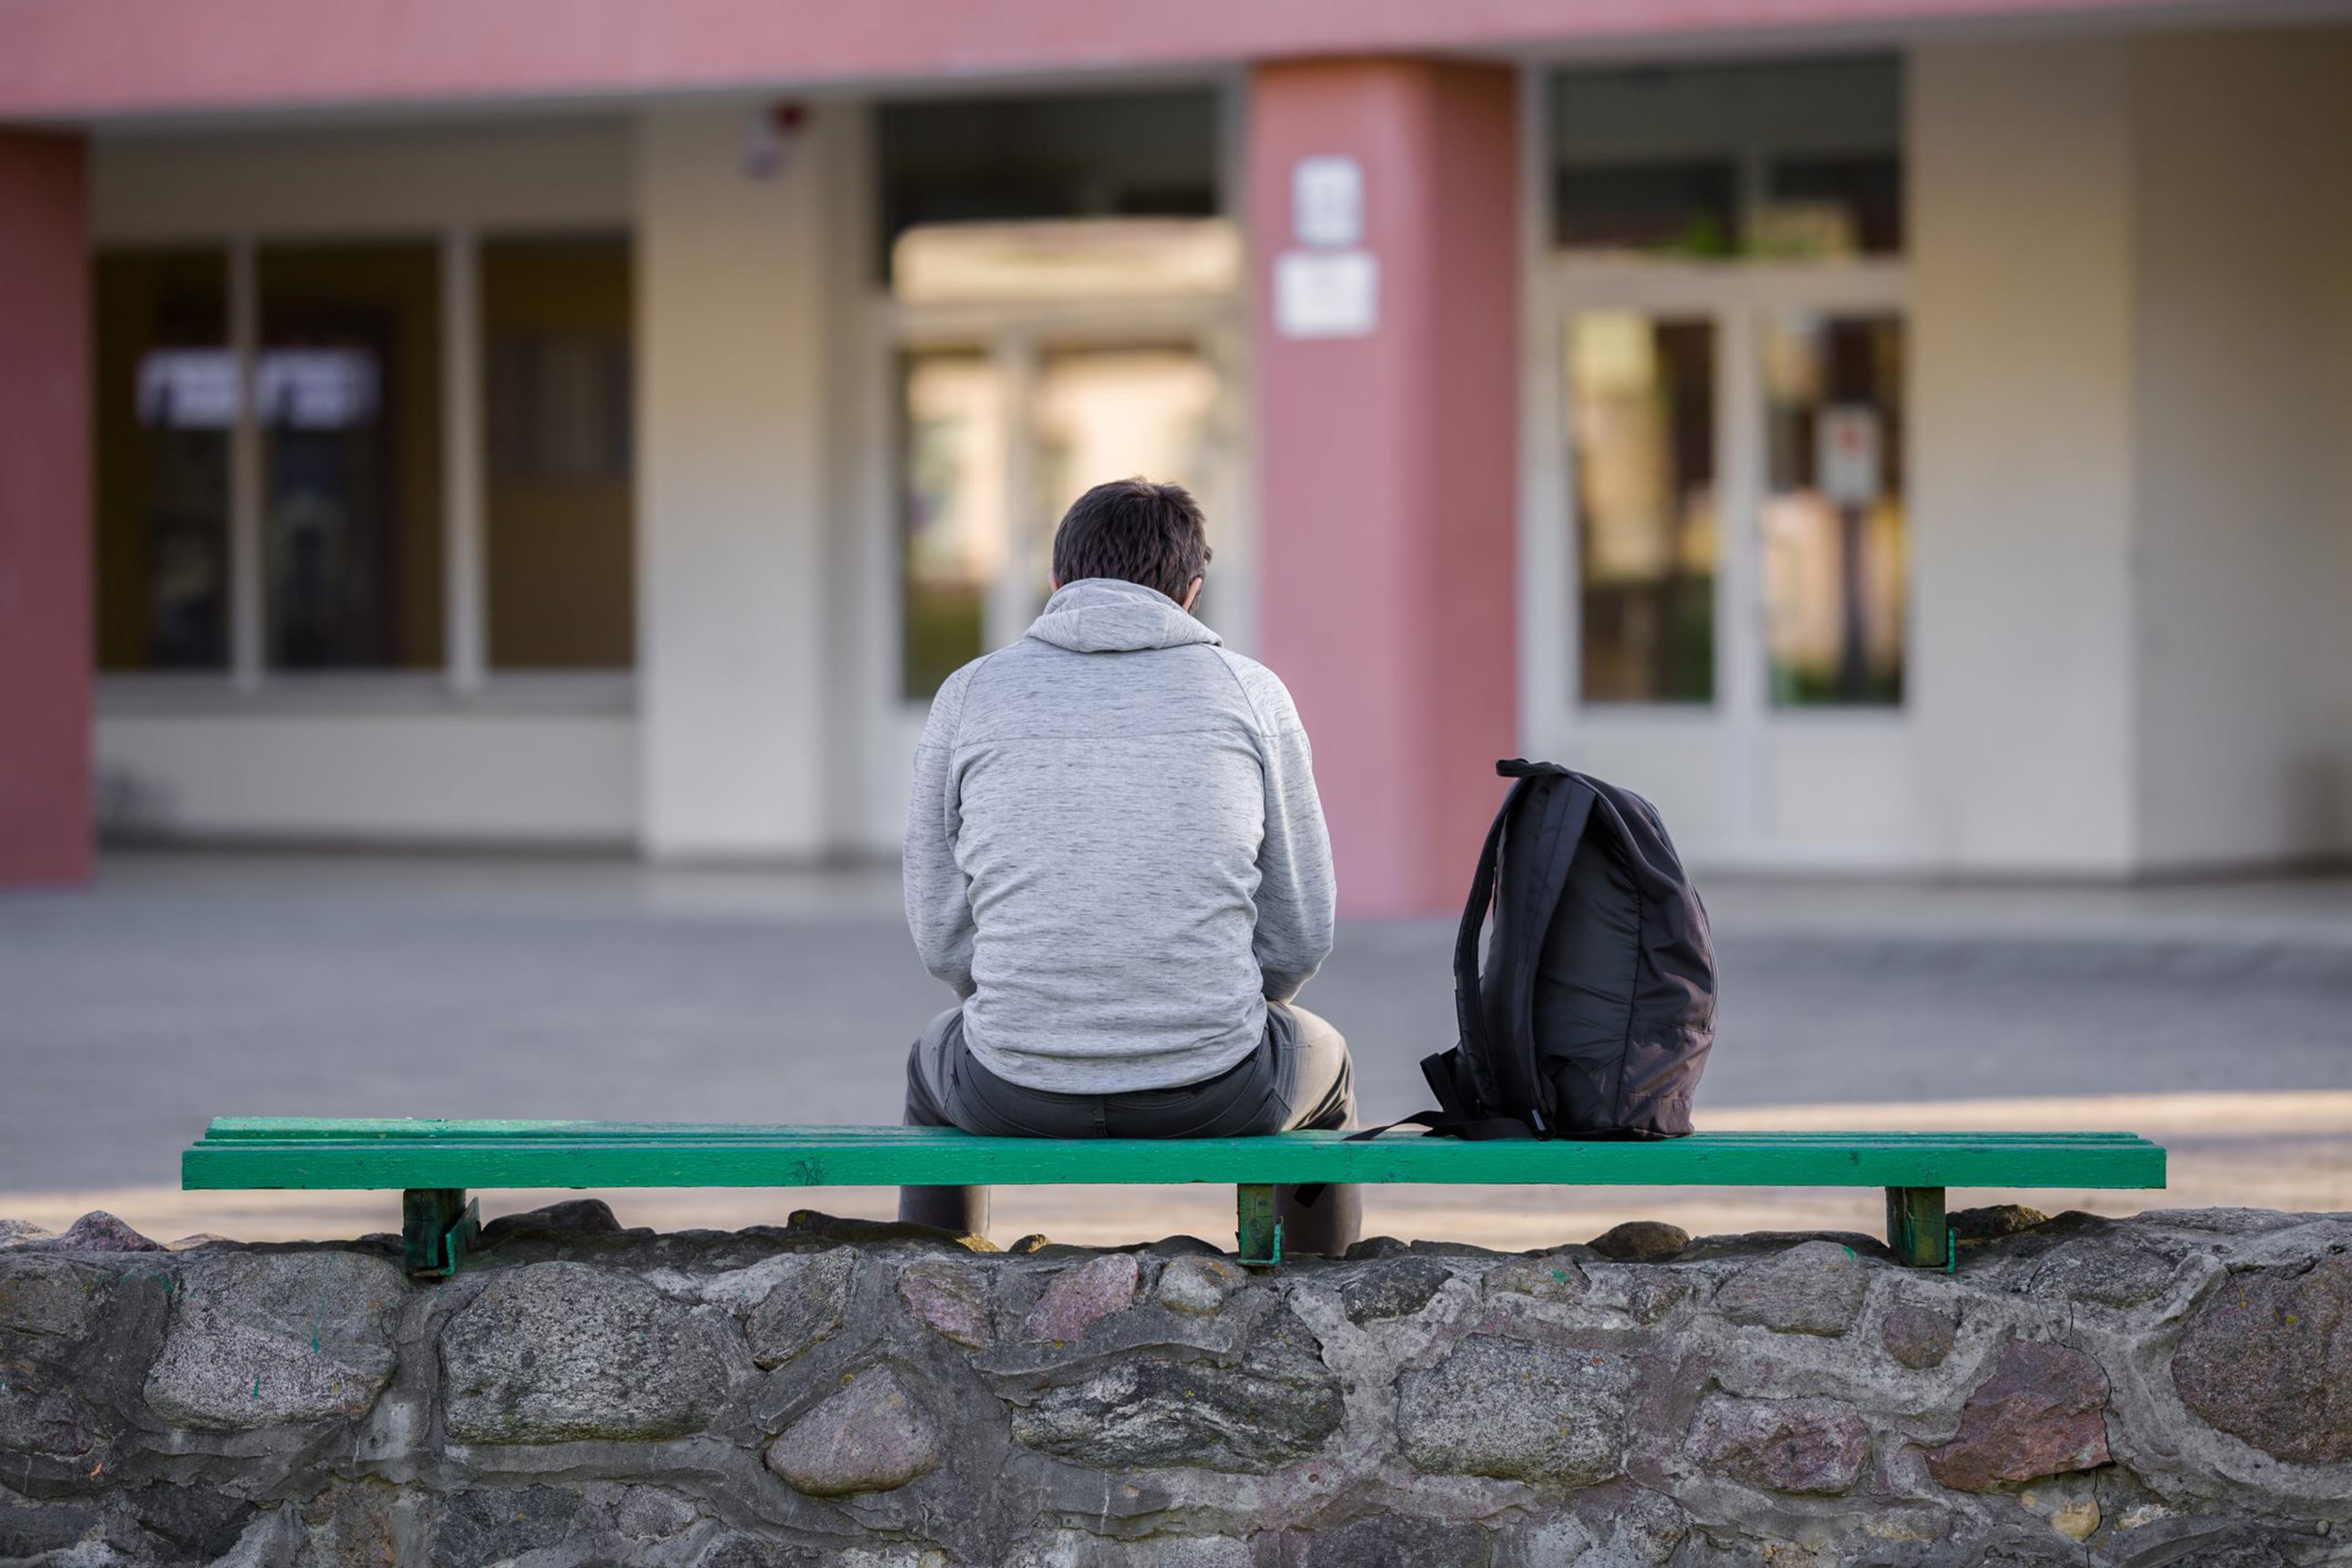 https://www.gettyimages.com/detail/photo/one-young-man-sitting-on-bench-at-school-yard-break-royalty-free-image/1227303349